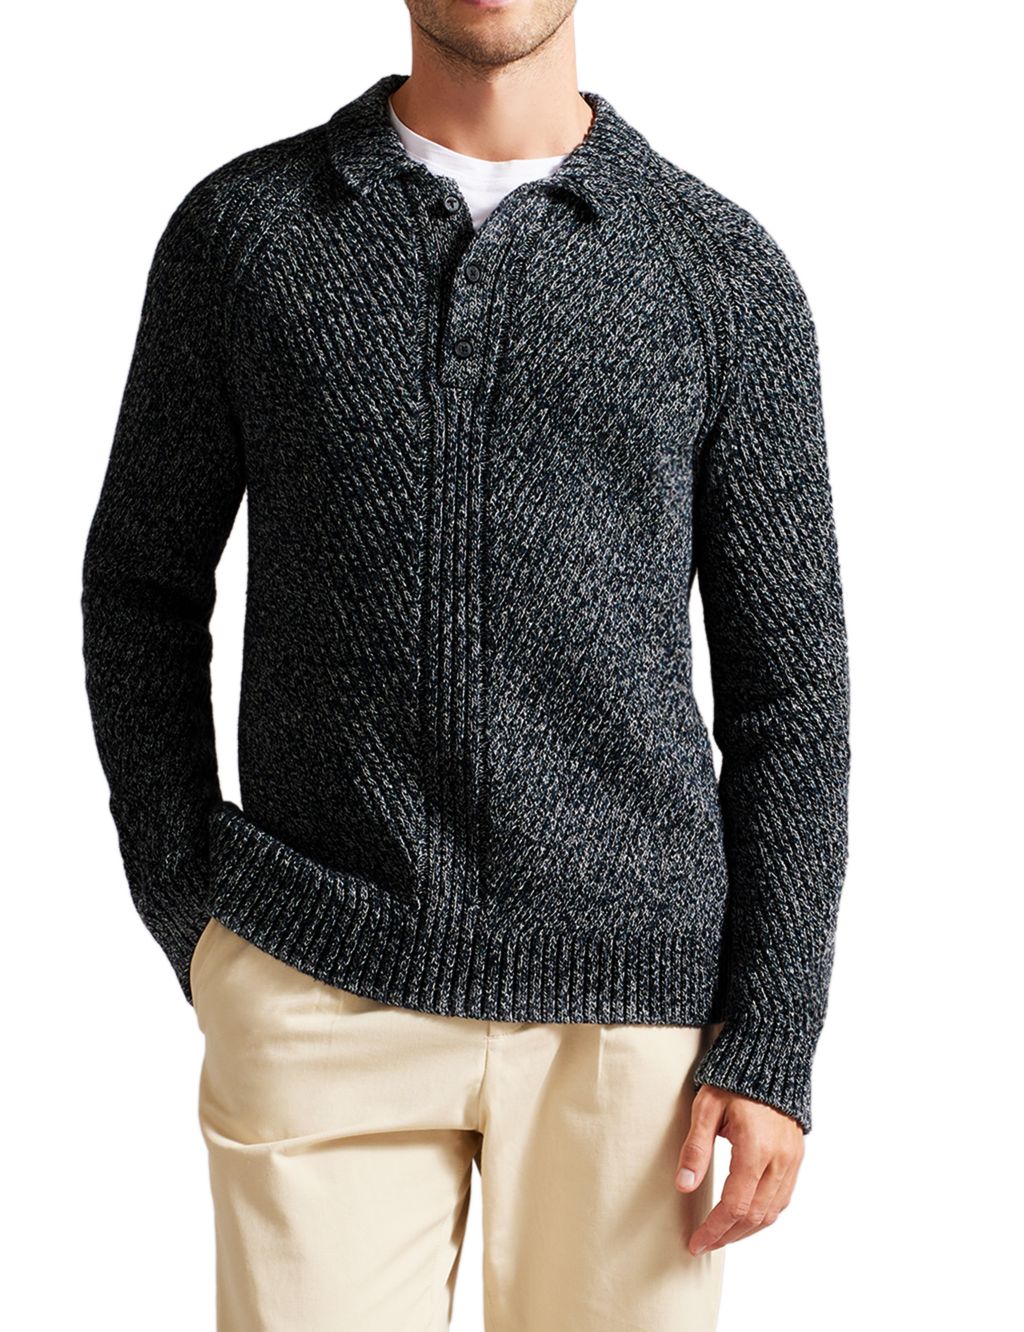 Cotton Rich Textured Knitted Polo Shirt image 1